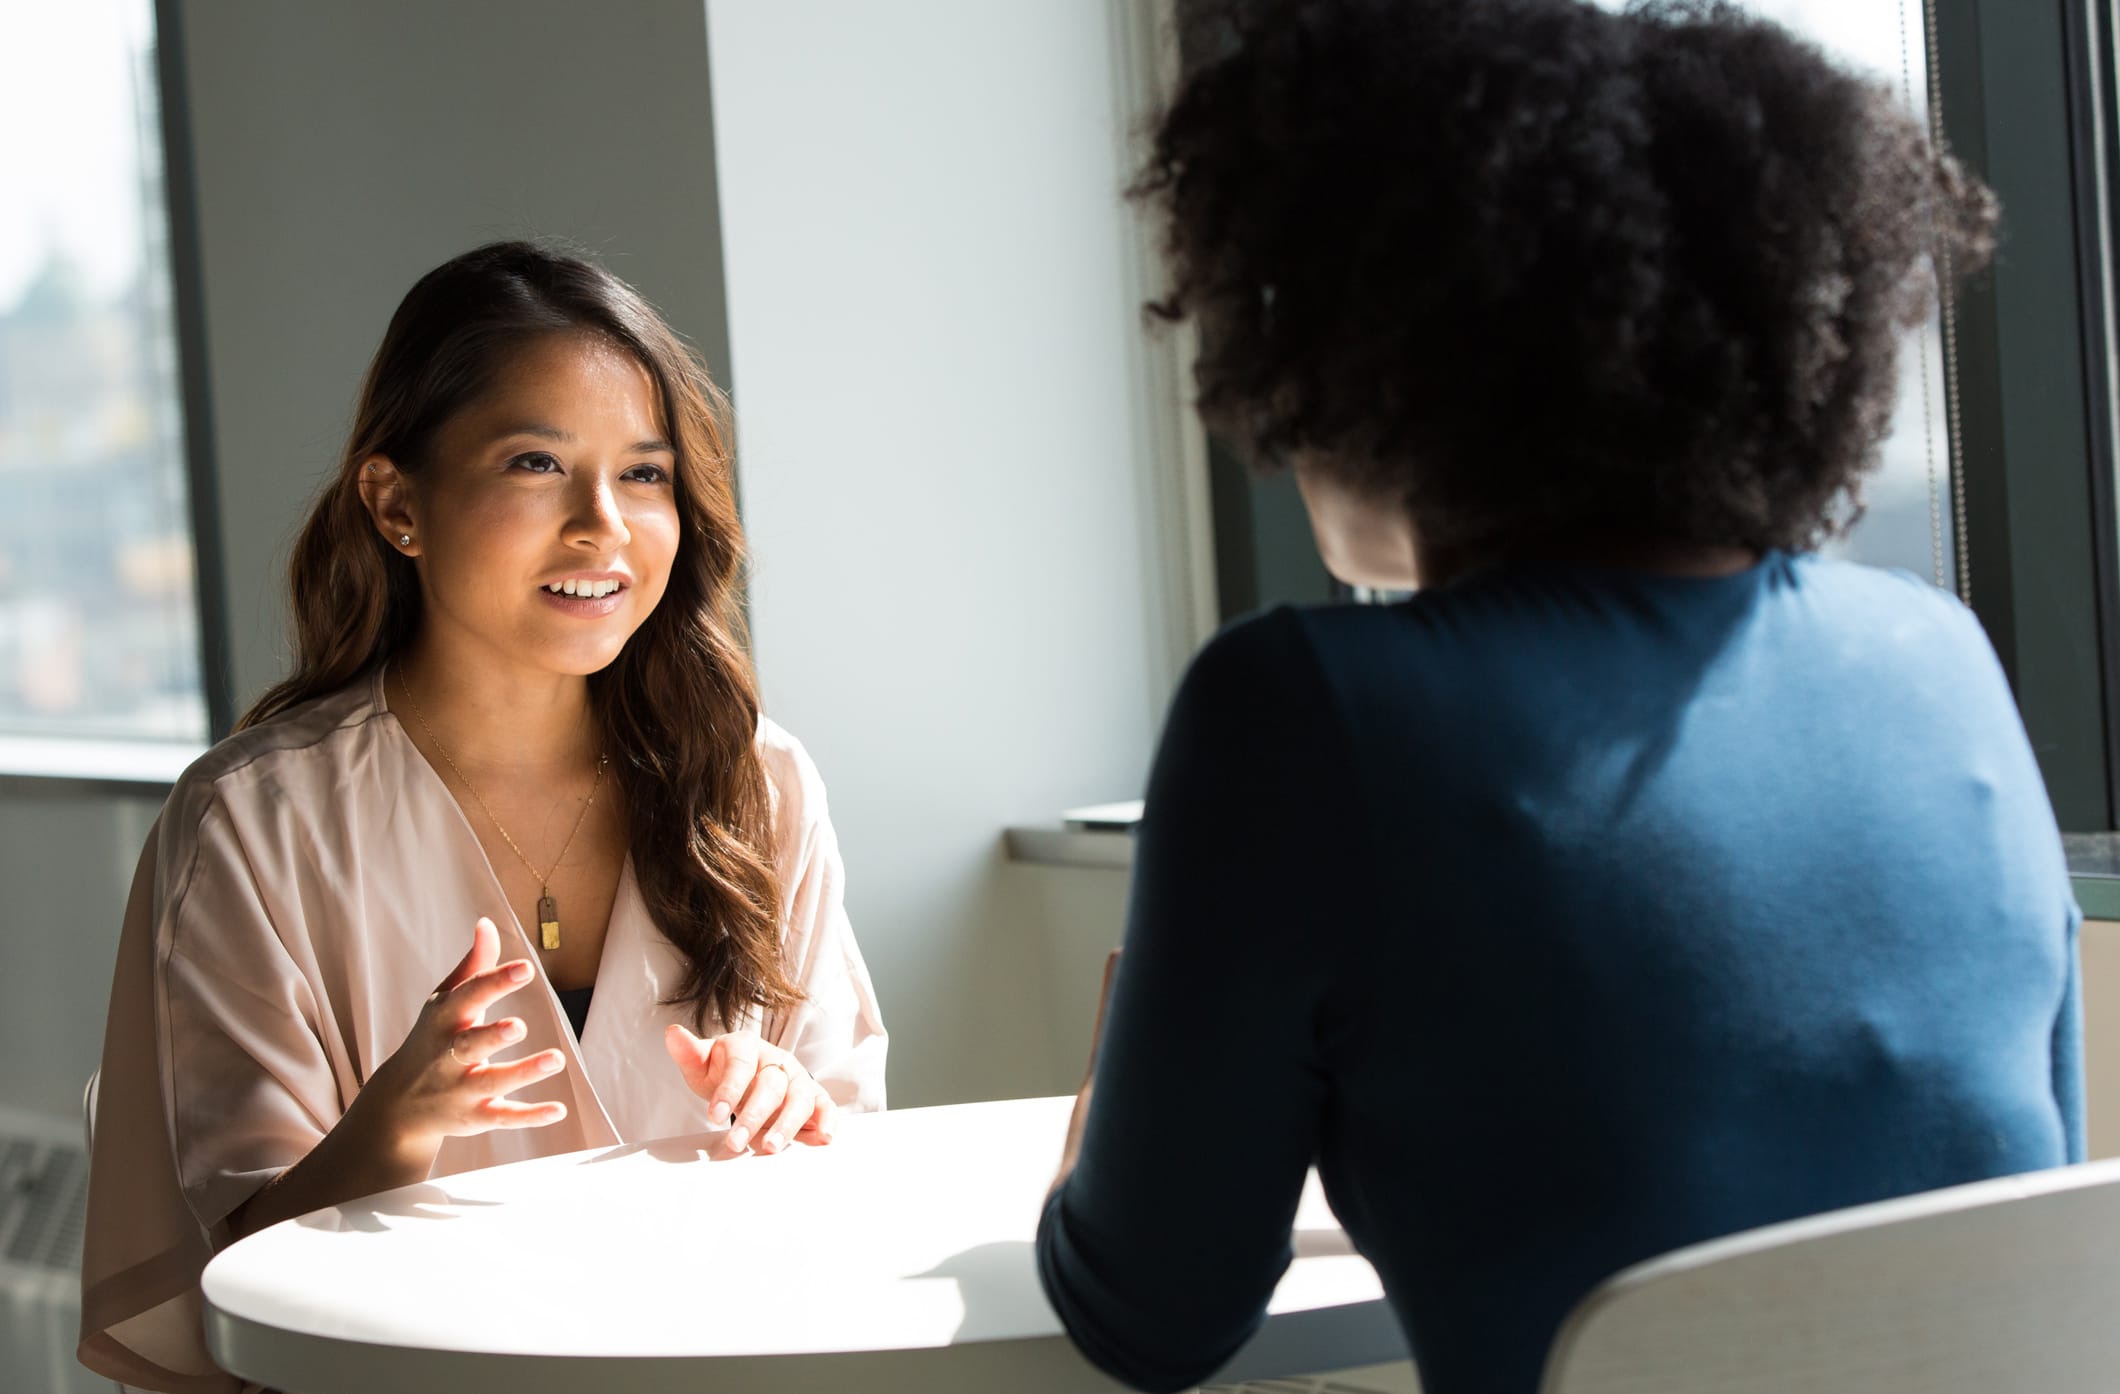 Tips on preparing for your interview